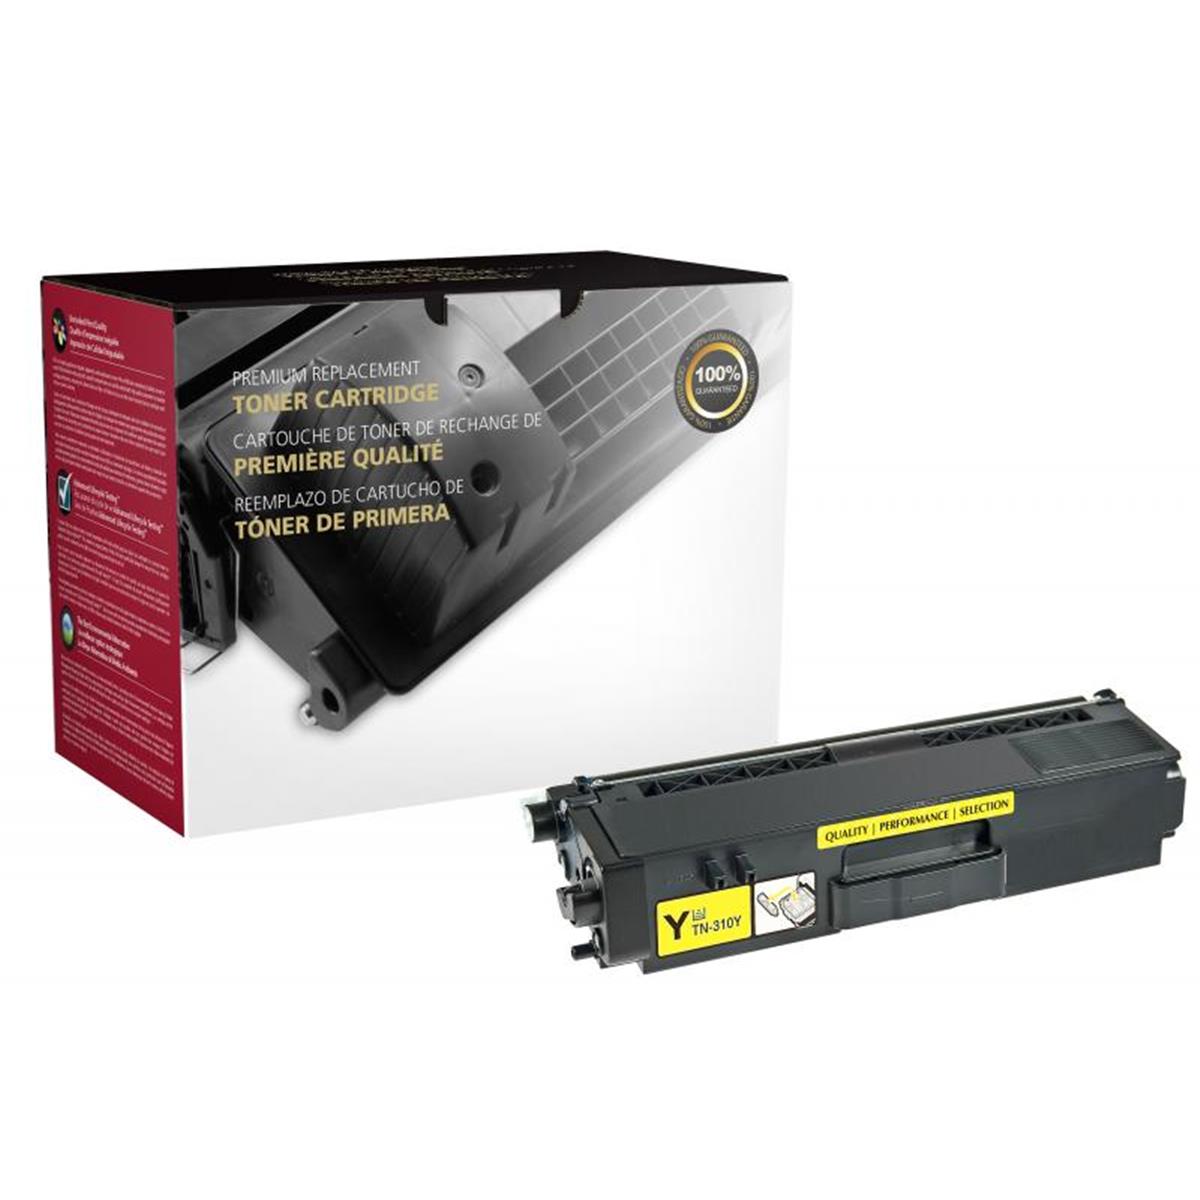 Picture of Brother 200595P Yellow Toner Cartridge for TN310